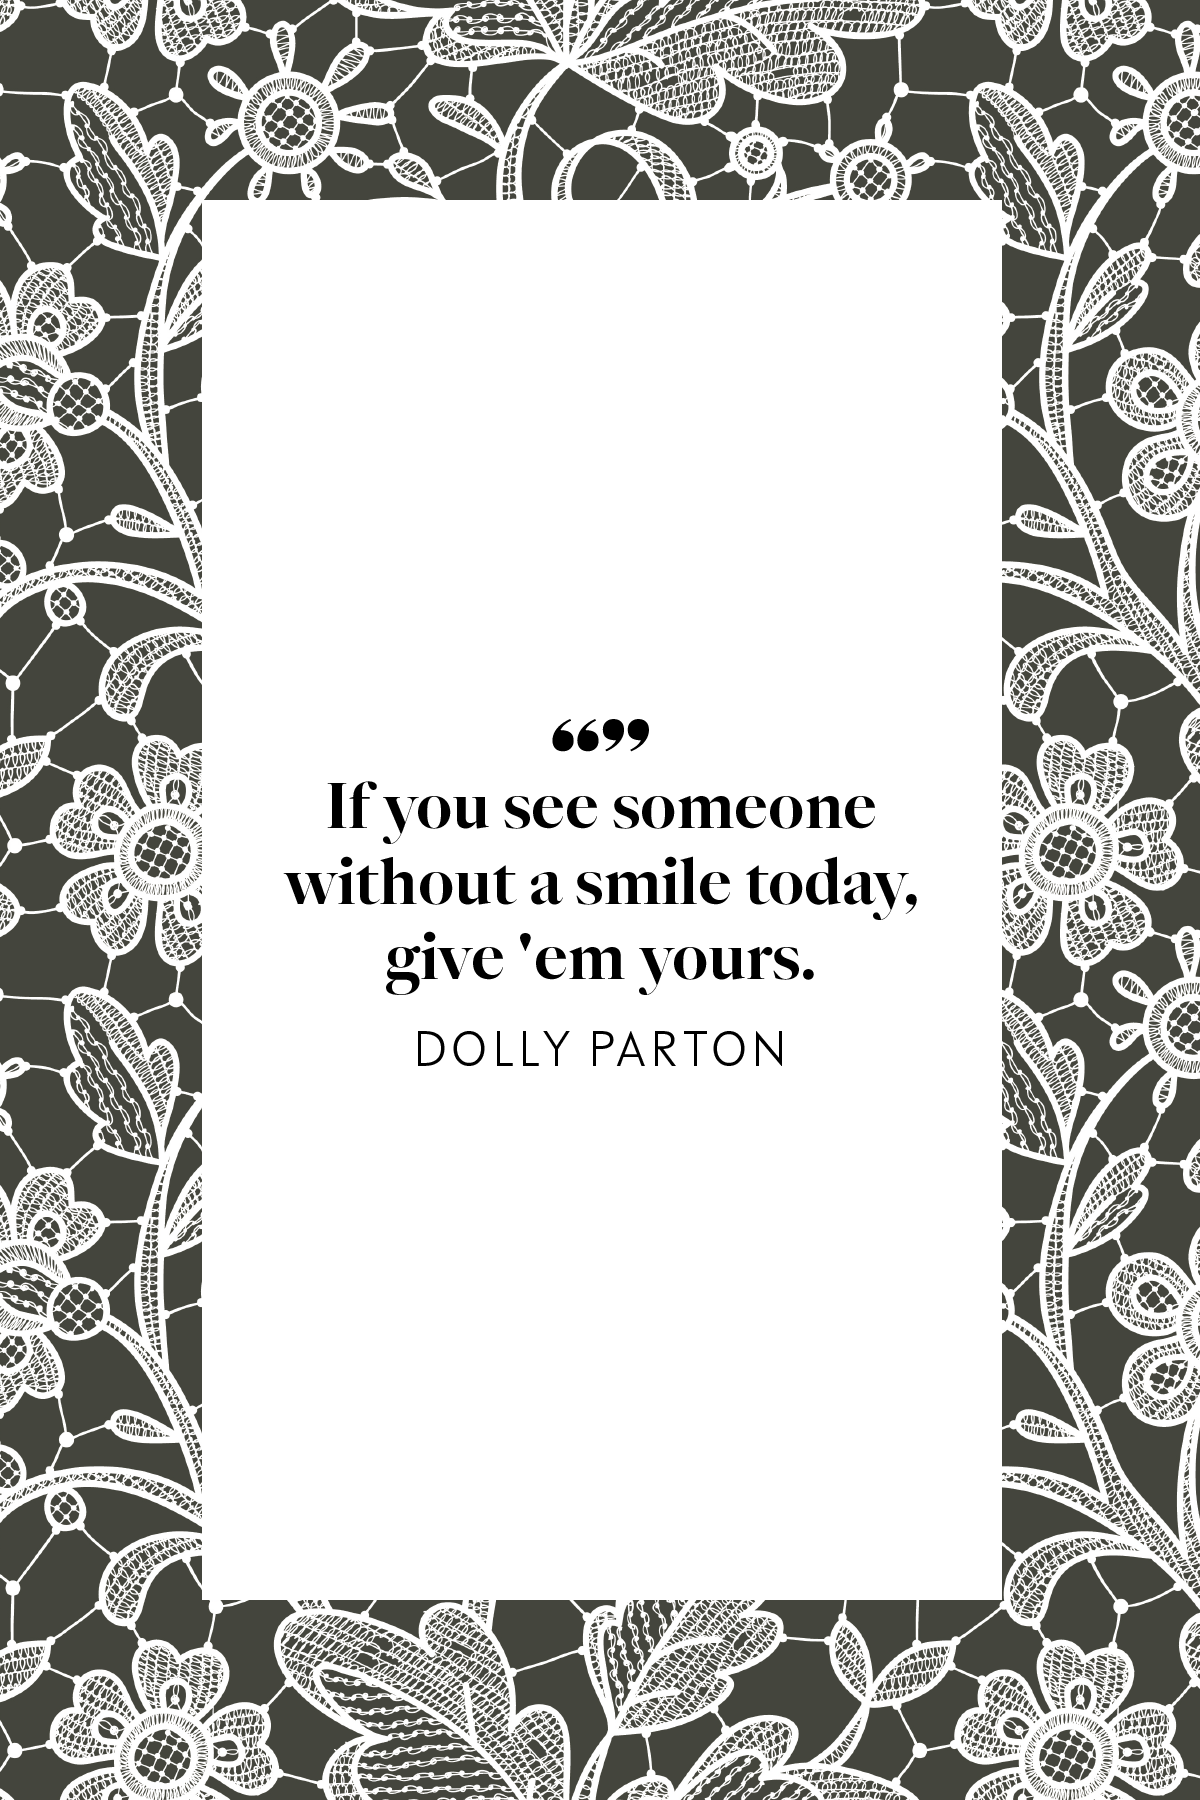 Dolly Parton Quote Im just a simple country girl